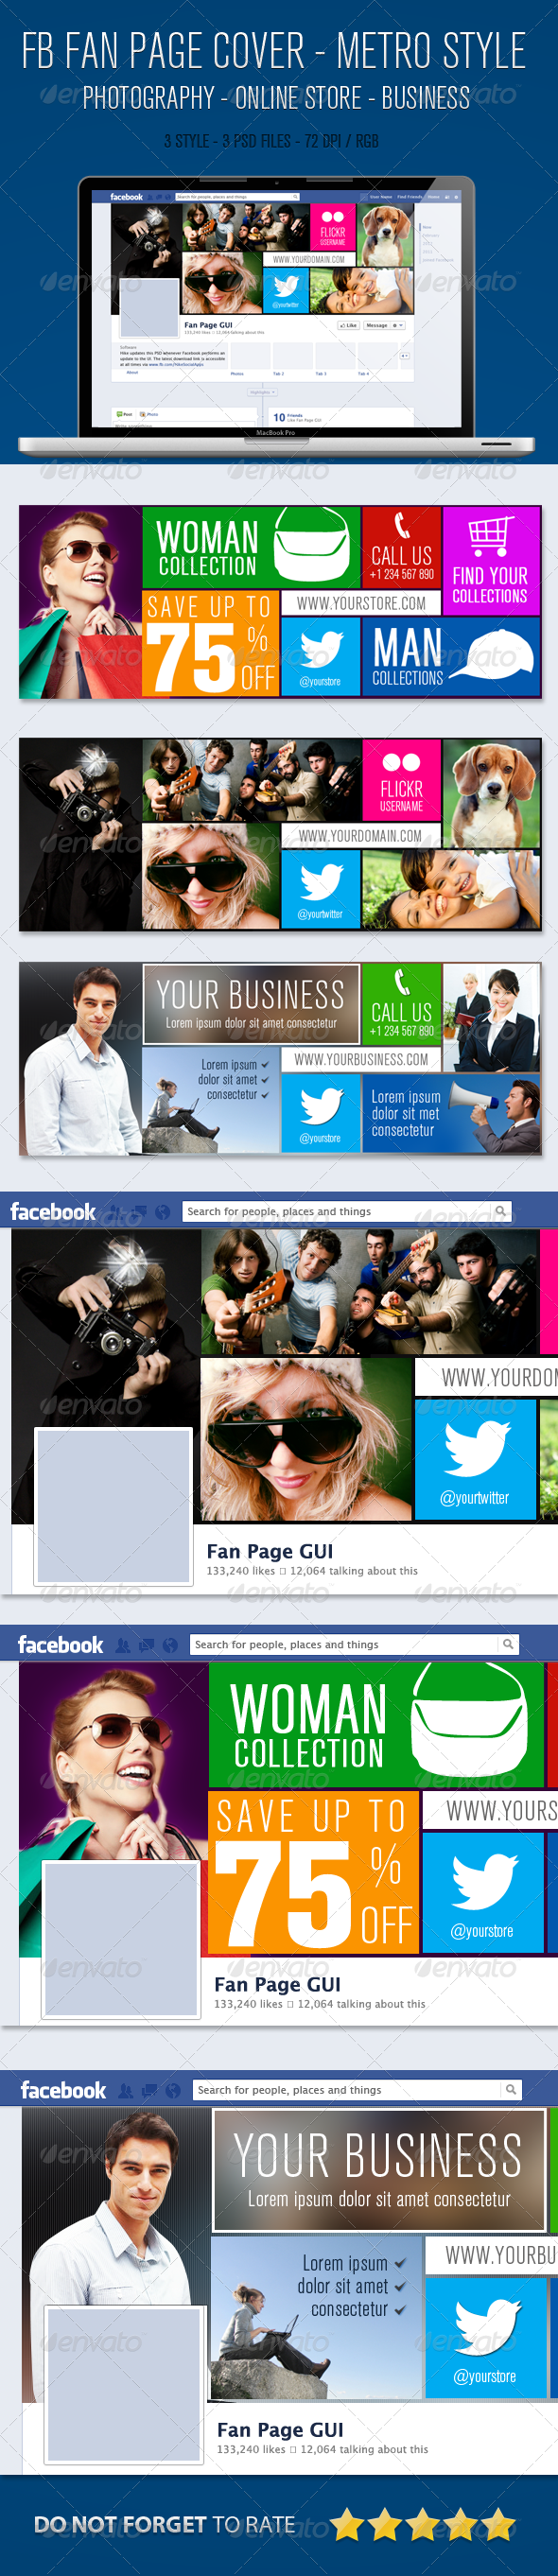 Facebook Fan Page Timeline Cover - Metro Style